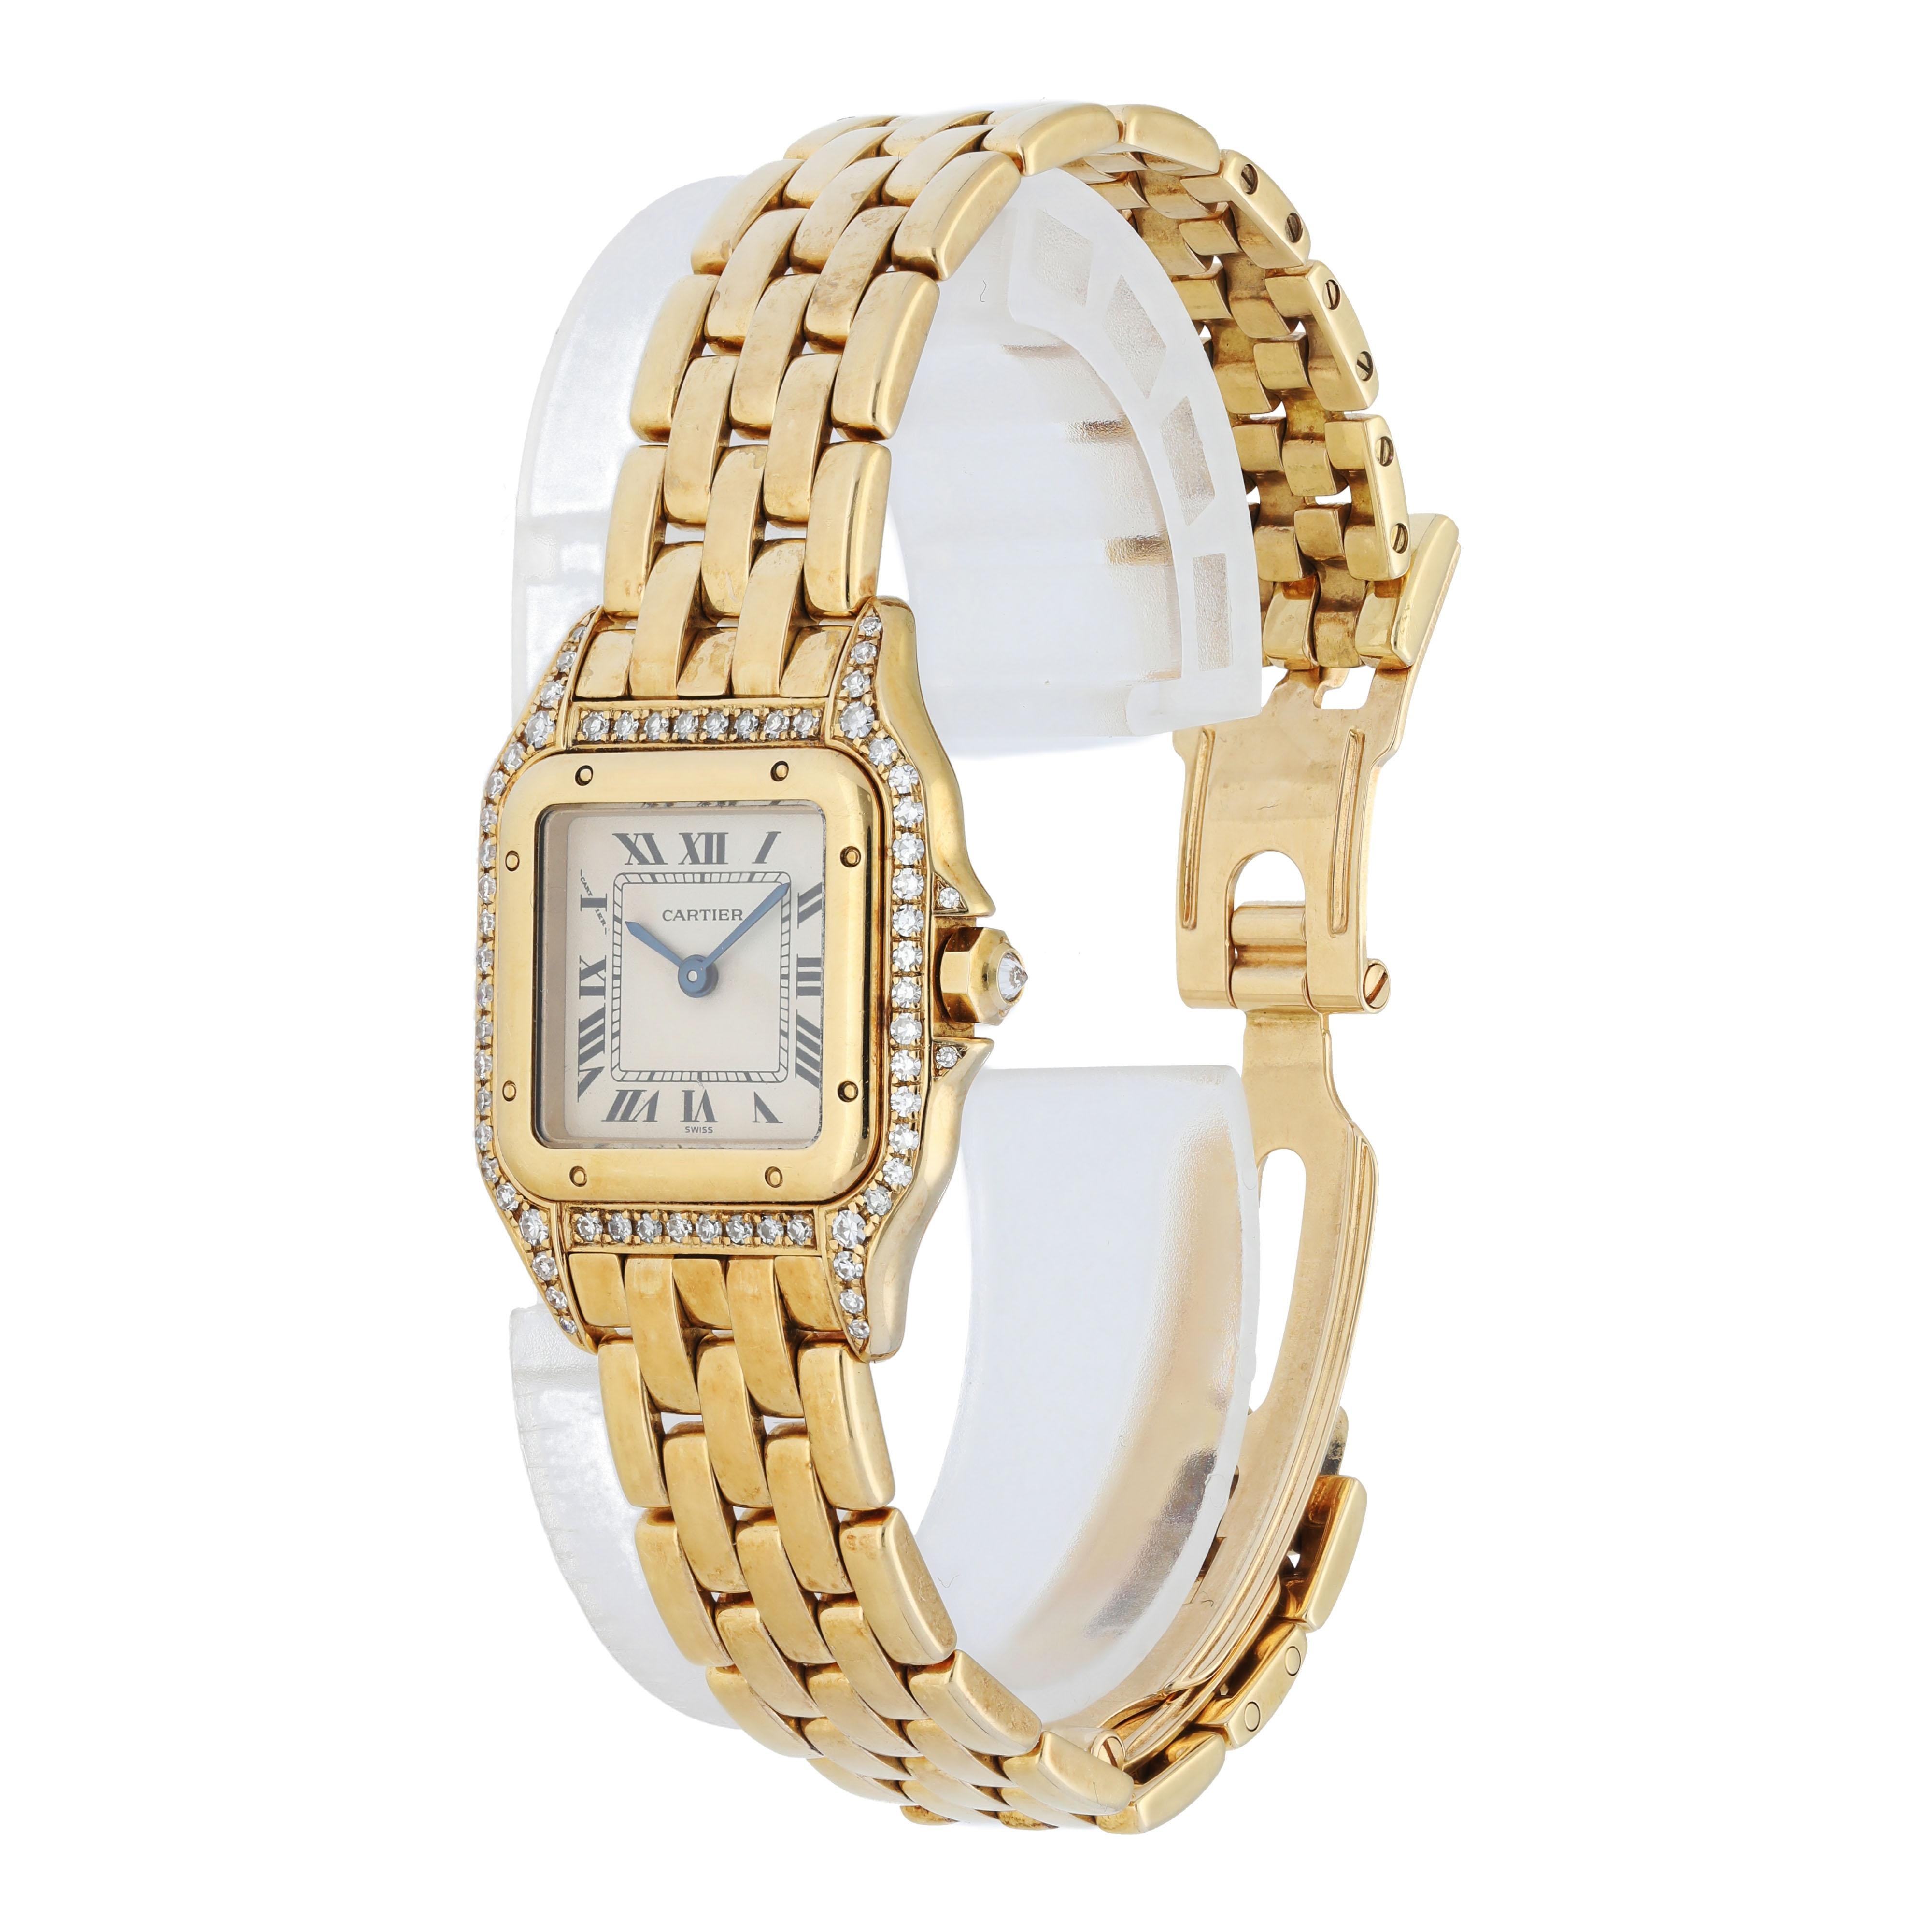 Cartier Panthere 1280 2 18k Yellow Gold Ladies Watch. 
23mm 18K Yellow Gold & Diamonds case. 
18k Yellow Gold smooth bezel. 
Off-White dial with Blue steel hands and Roman numeral hour markers. 
Minute markers on the inner dial. 
Yellow Gold